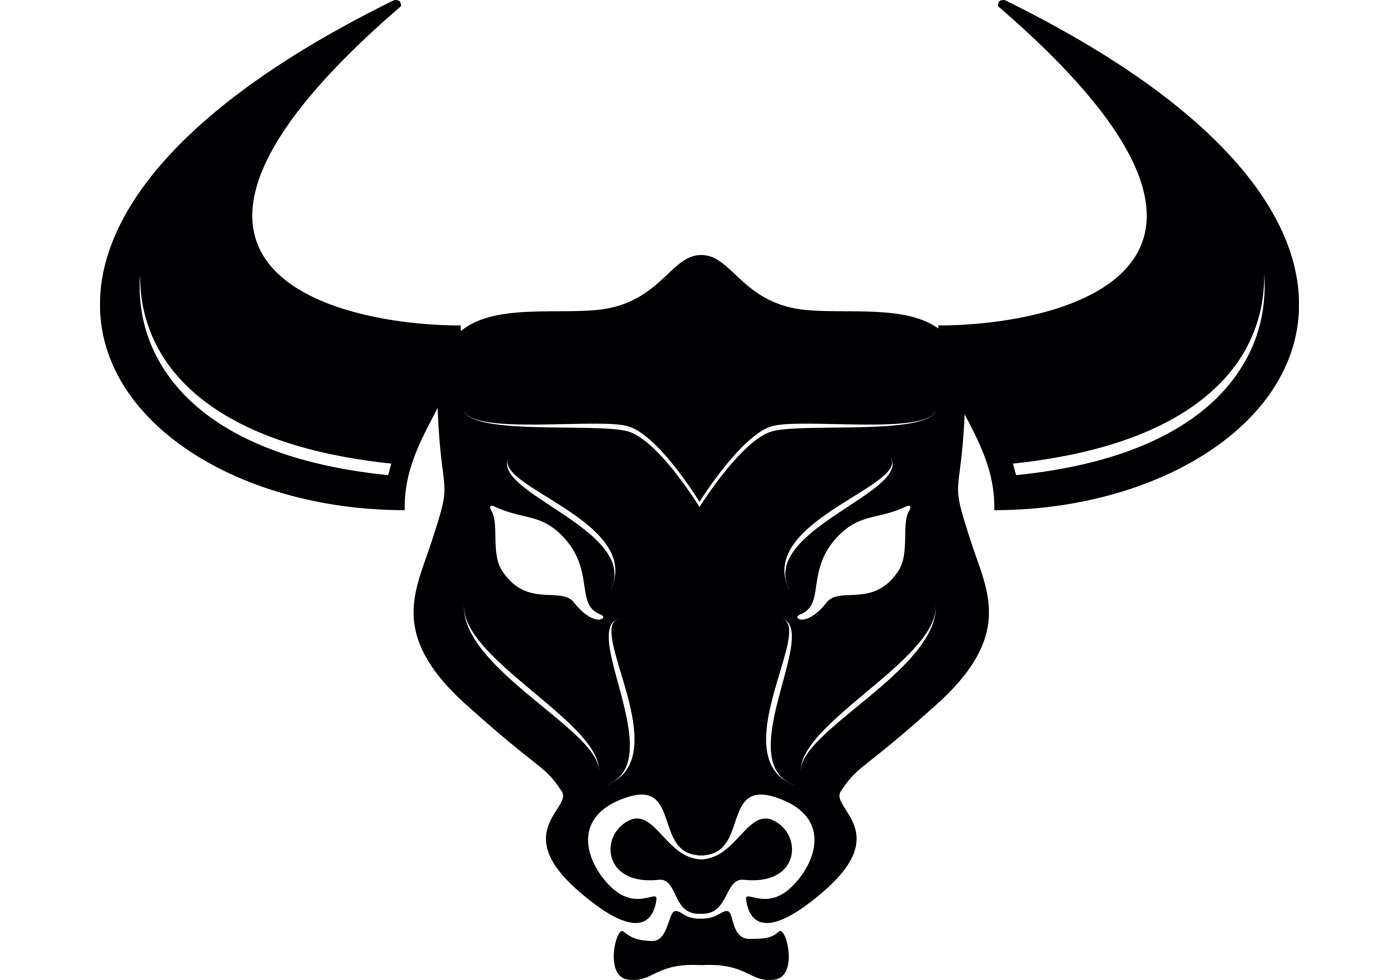 Bull face clipart images gallery for free download